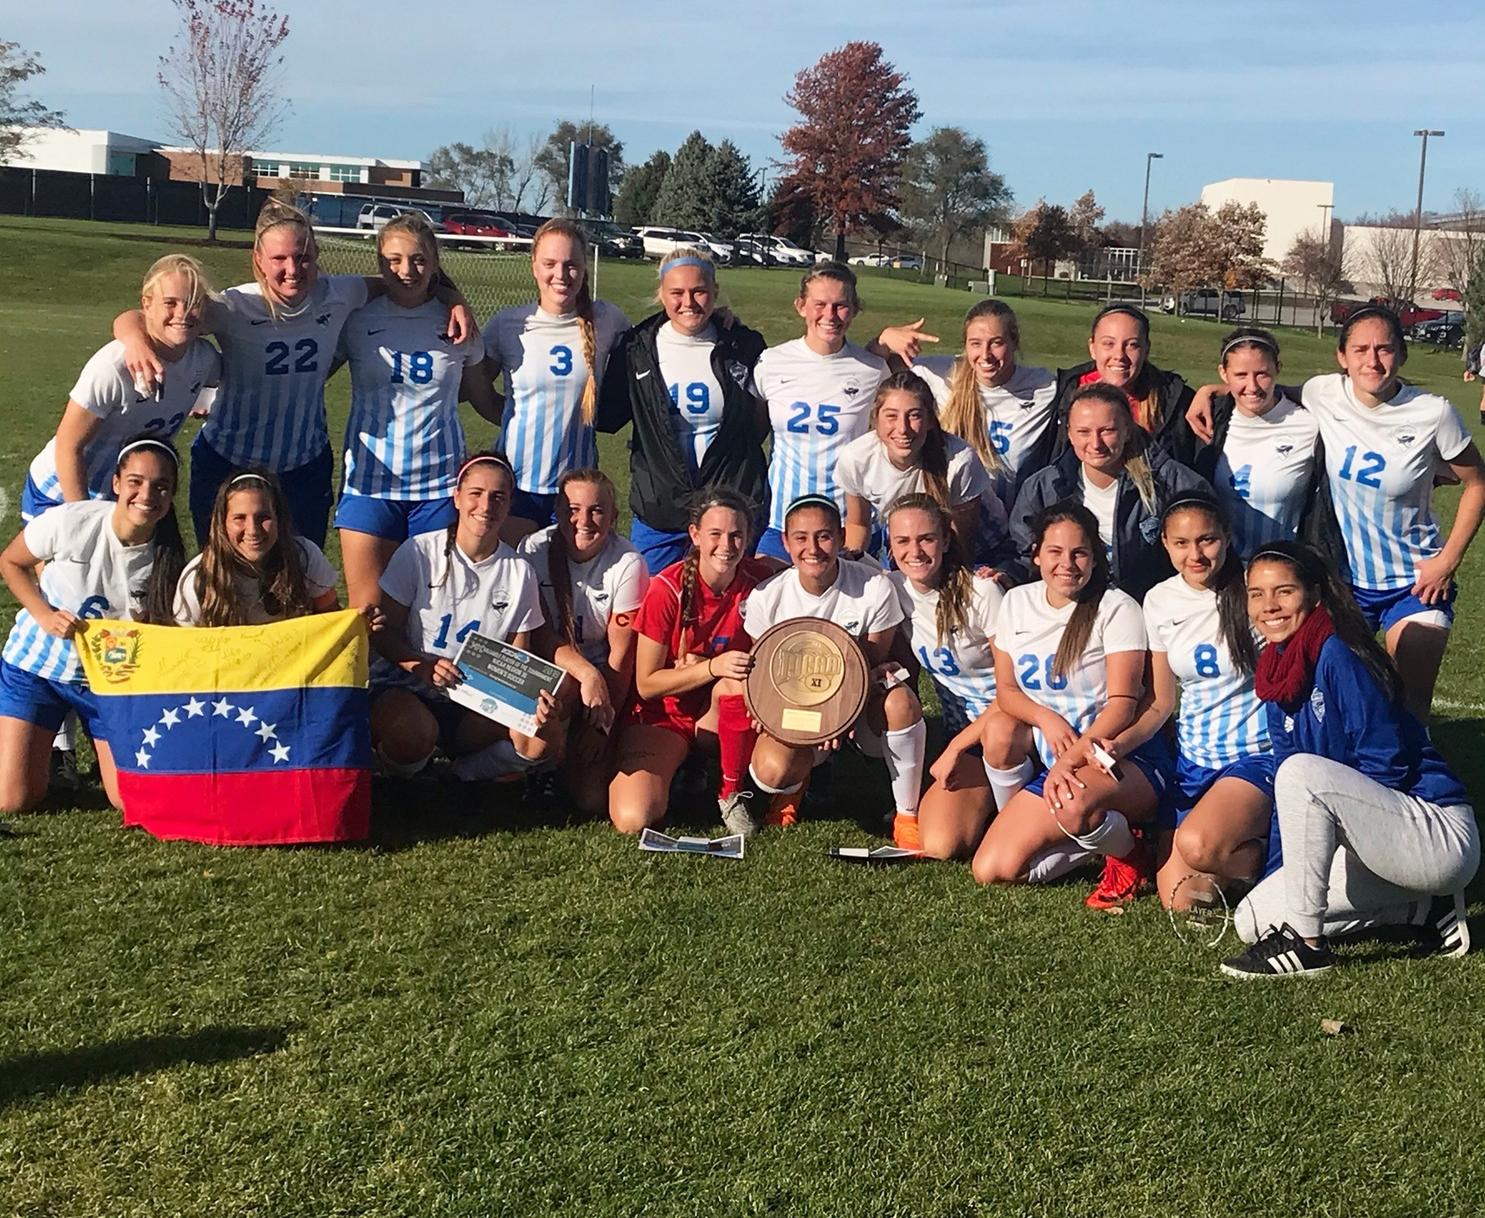 Reivers become Region XI Champions with 4-0 victory over Iowa Central